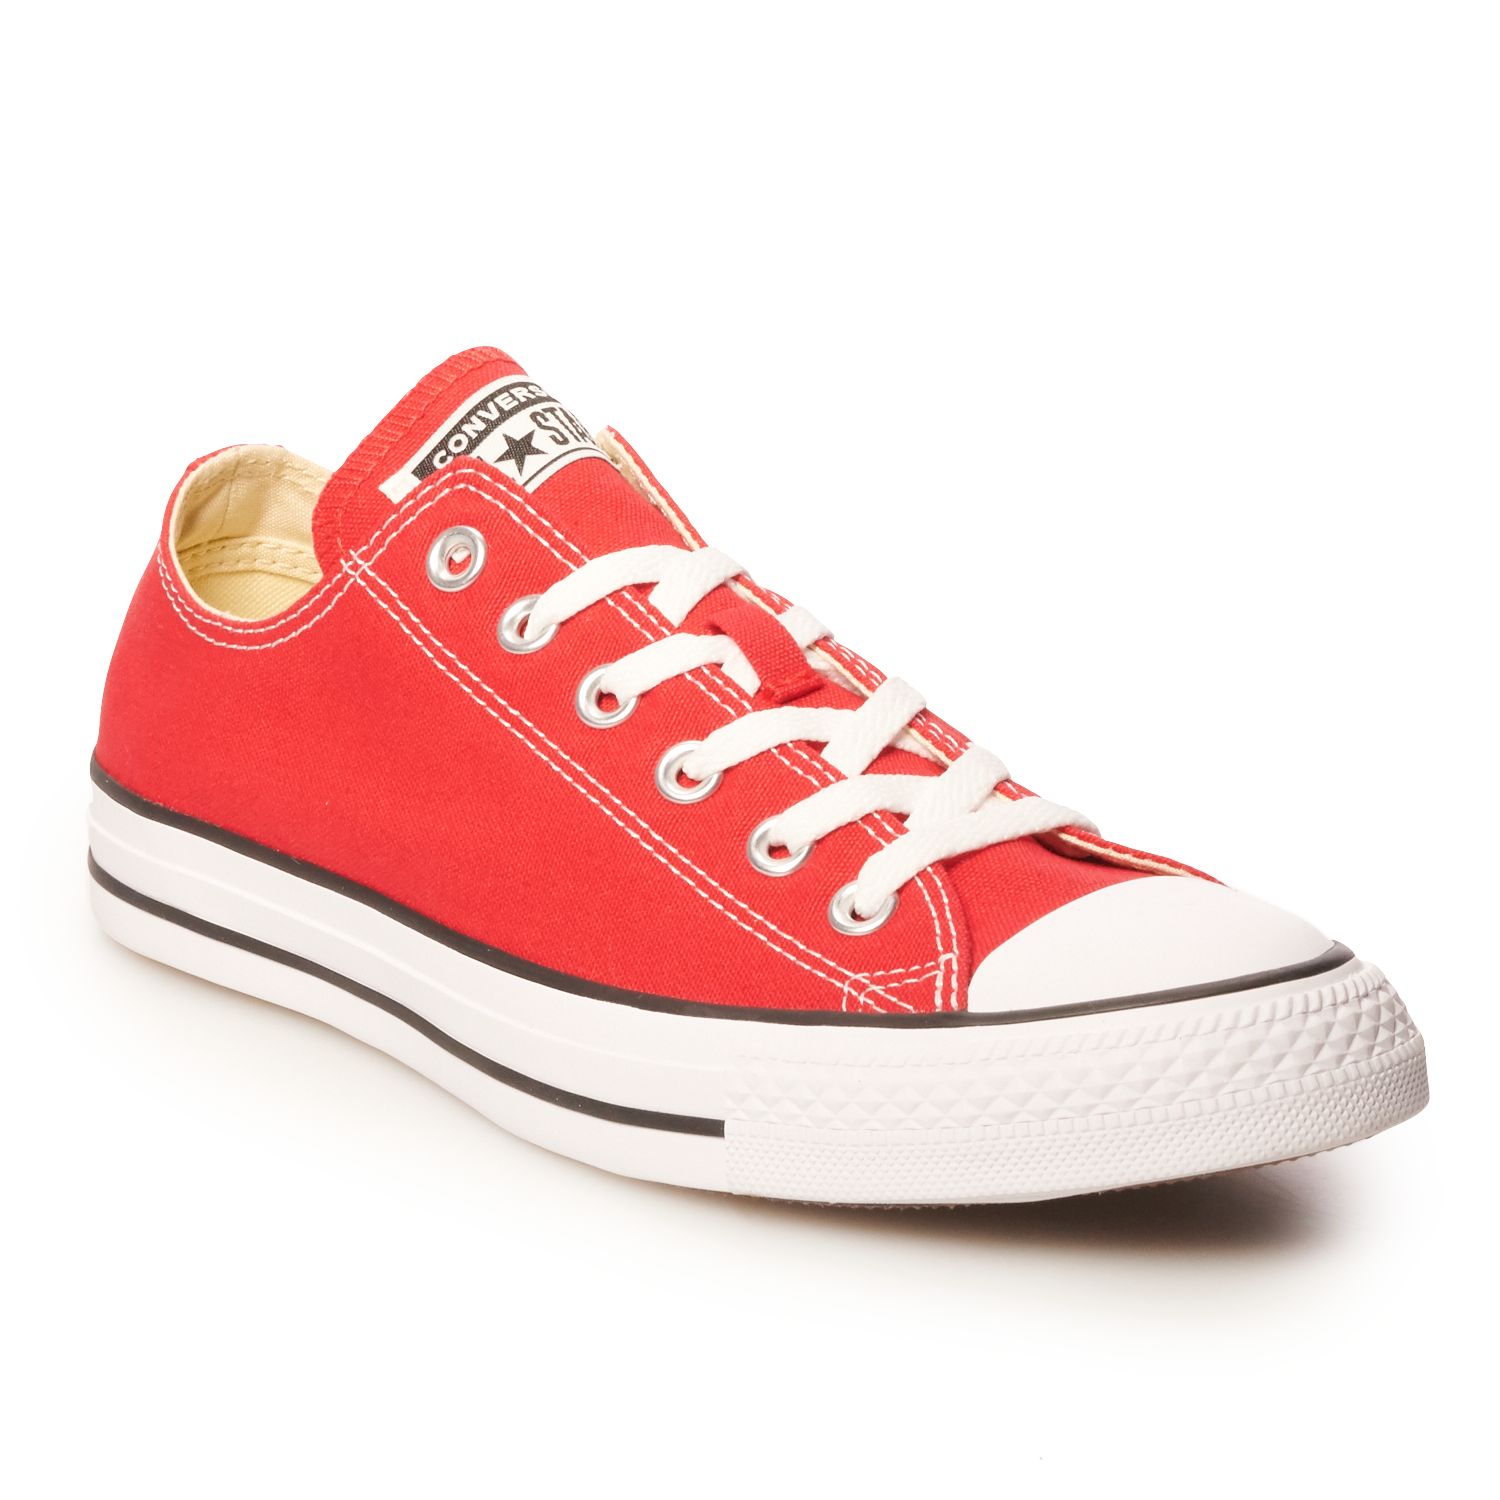 www all star converse shoes com